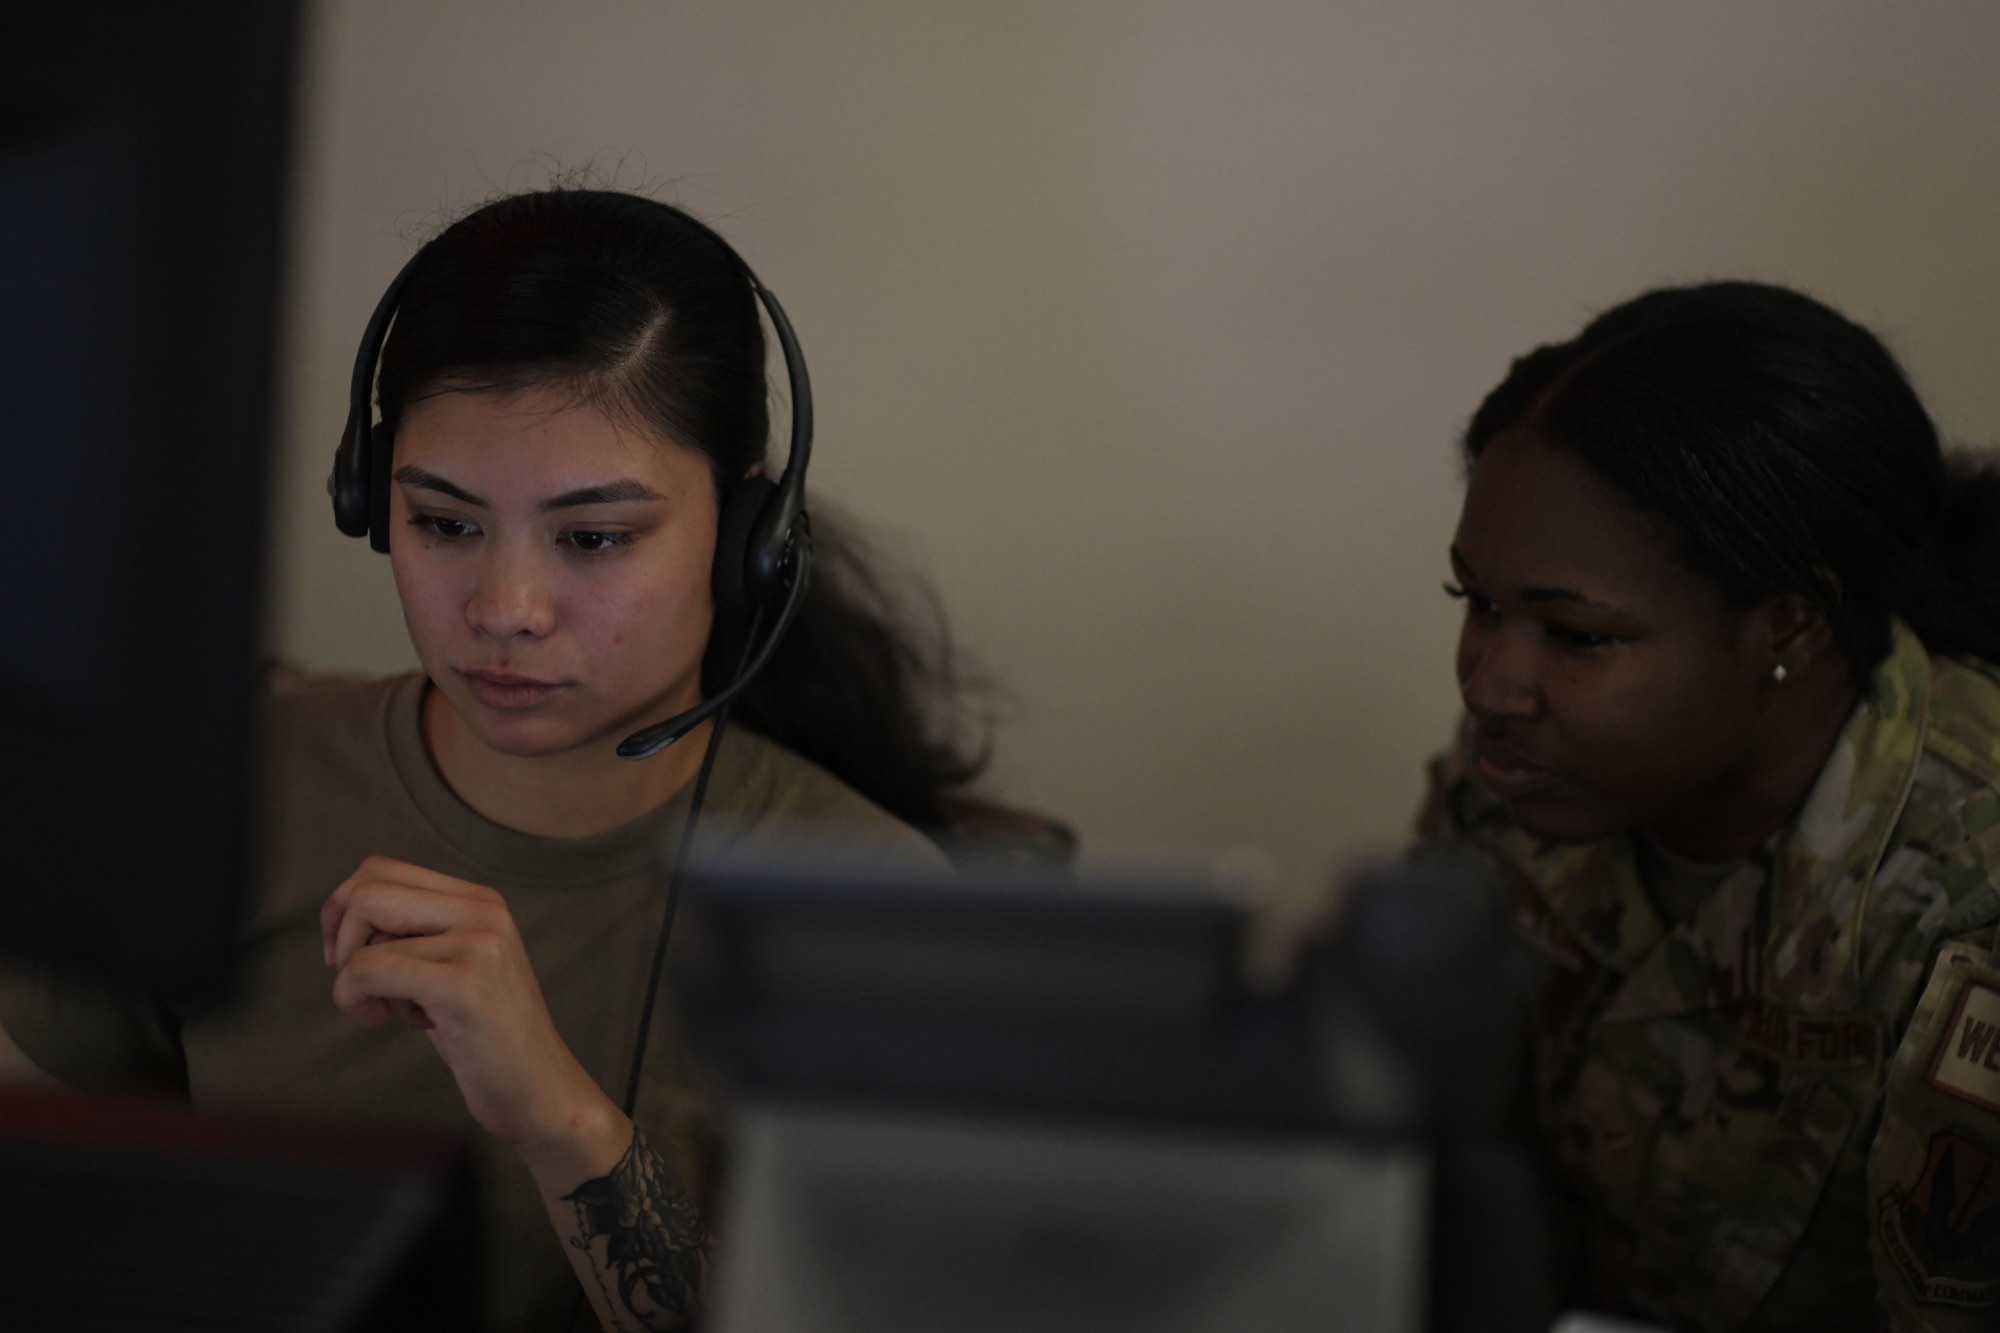 U.S. Air Force Senior Airman Anjeanette Florendo, left, and Airman 1st Class Mykisha Hamilton, right, 81st Air Control Squadron live technicians, monitor aircraft movement at Tyndall Air Force Base, Florida, March 29, 2022.